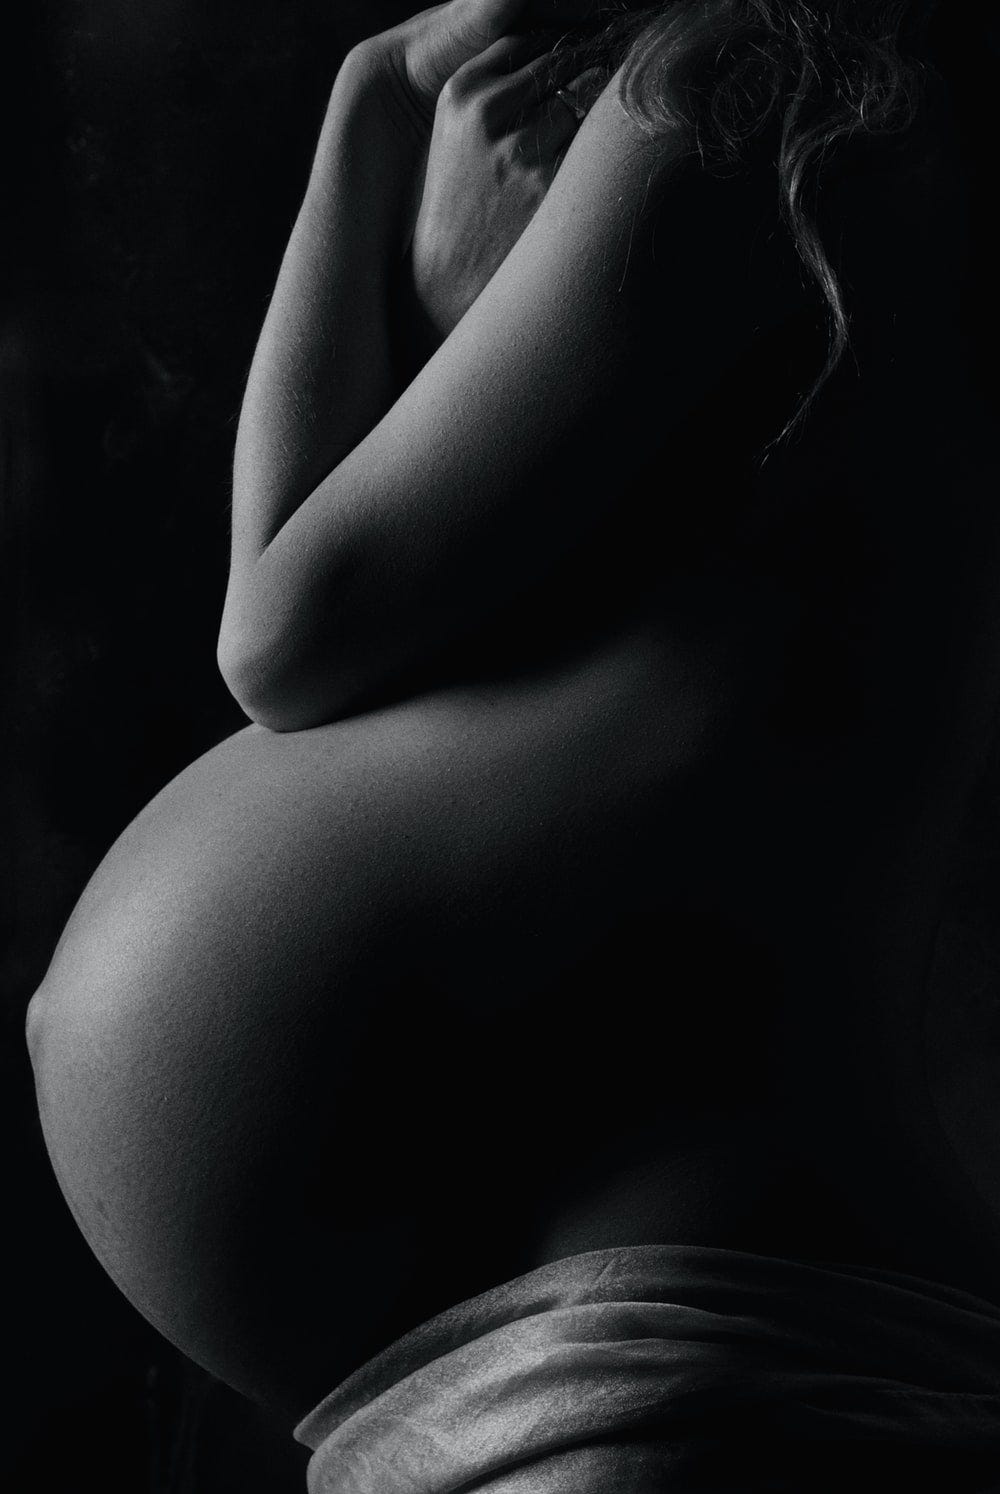 Black and white image of a pregnant woman’s belly.